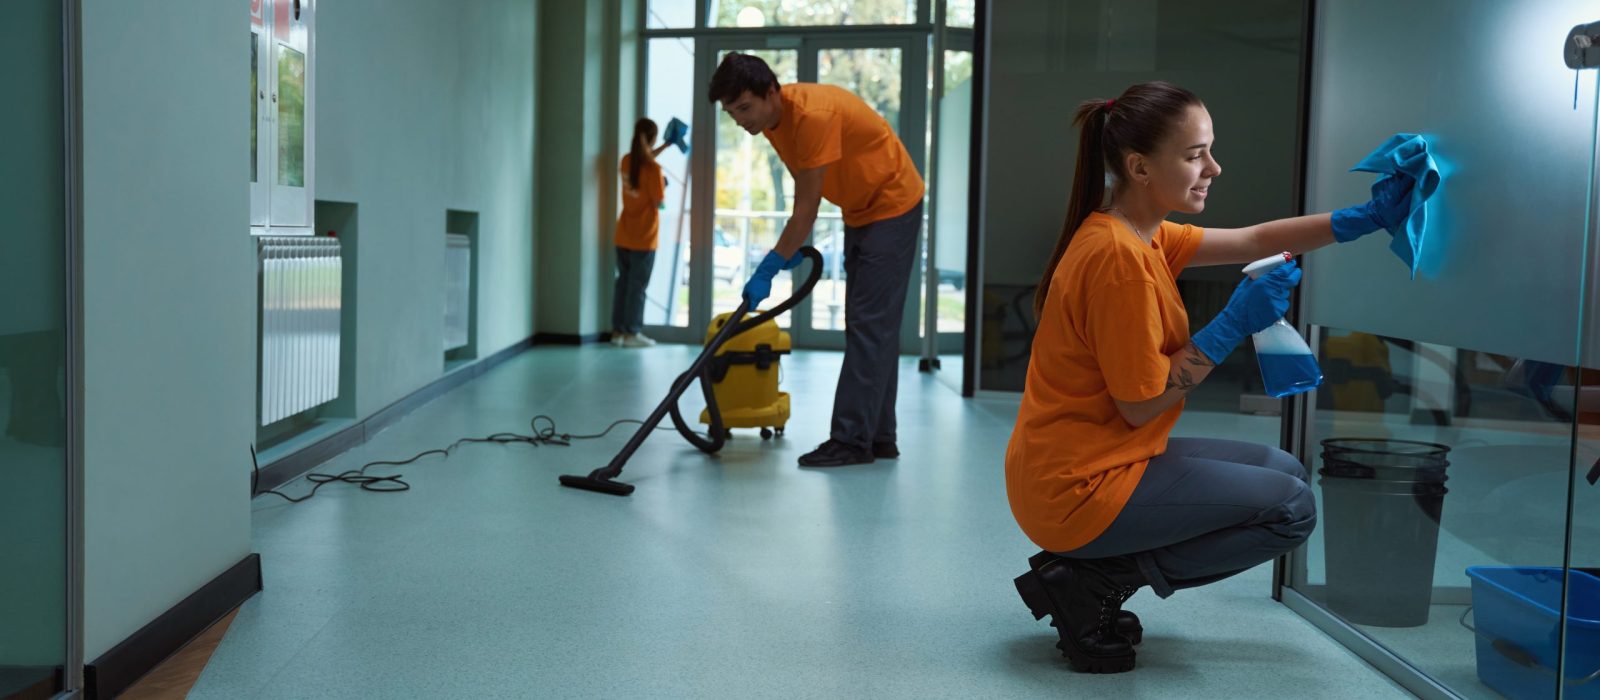 Three energetic cleaners are performing various procedures to make the room clean and cozy